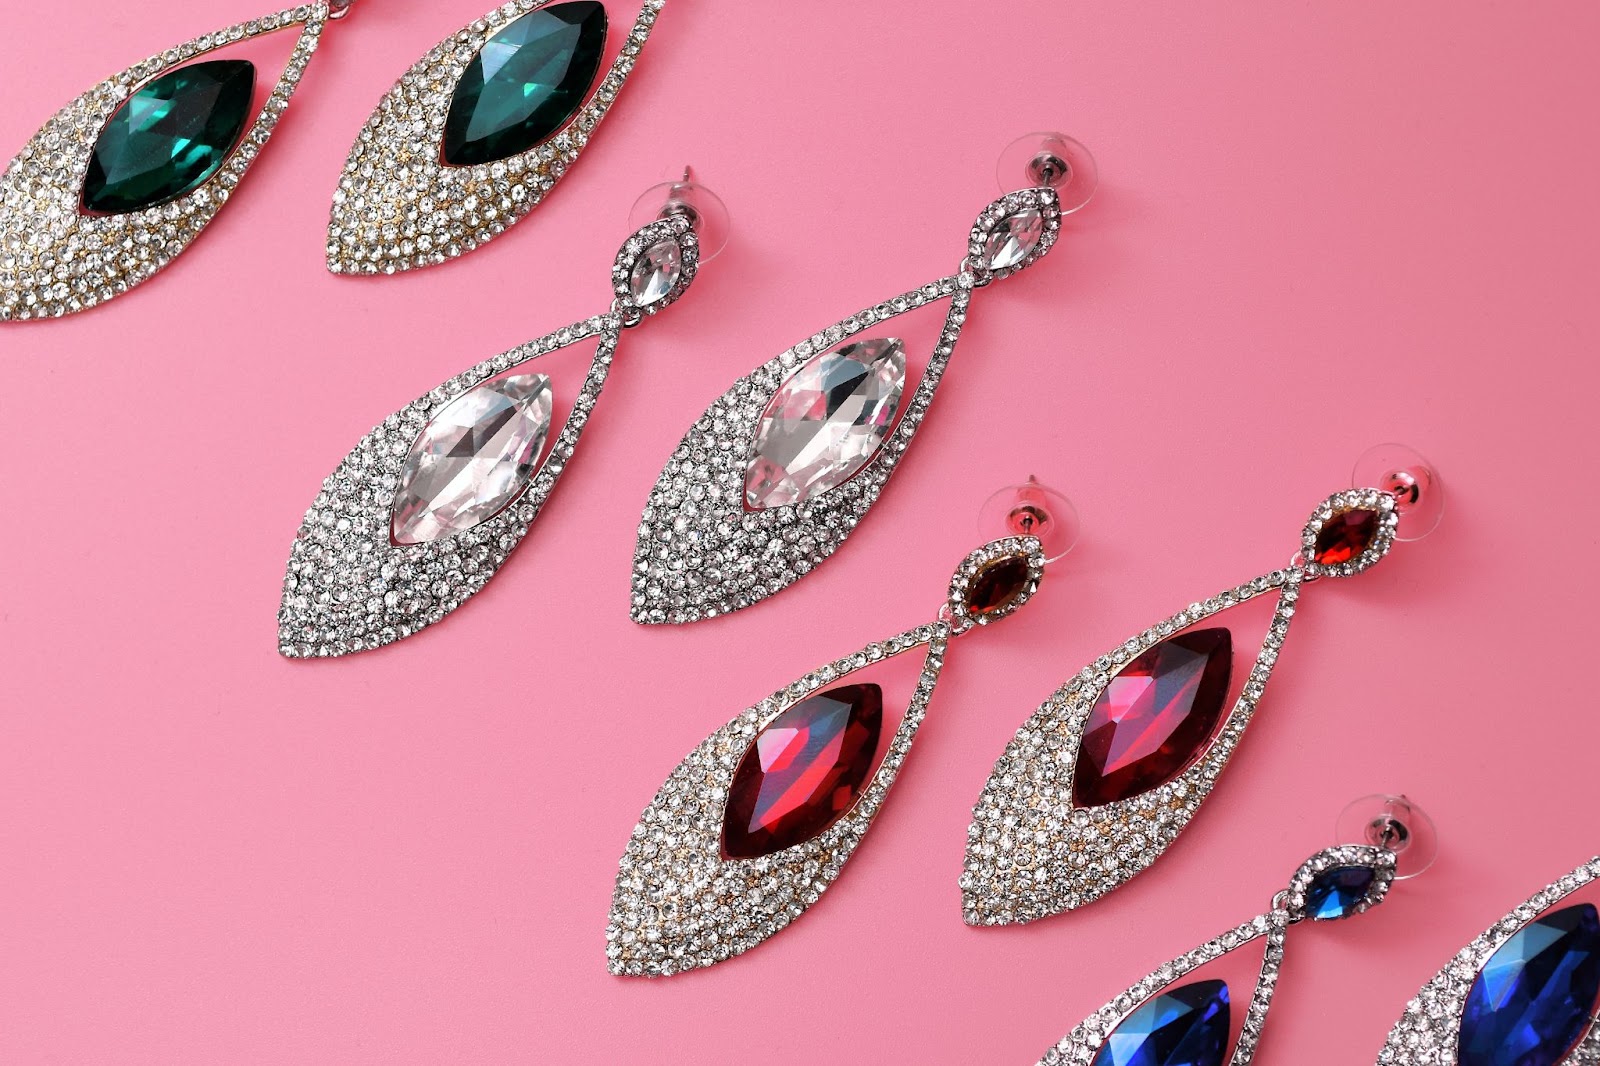 While your dress is the focal point of your look, your jewelry will really emphasize the vibe.